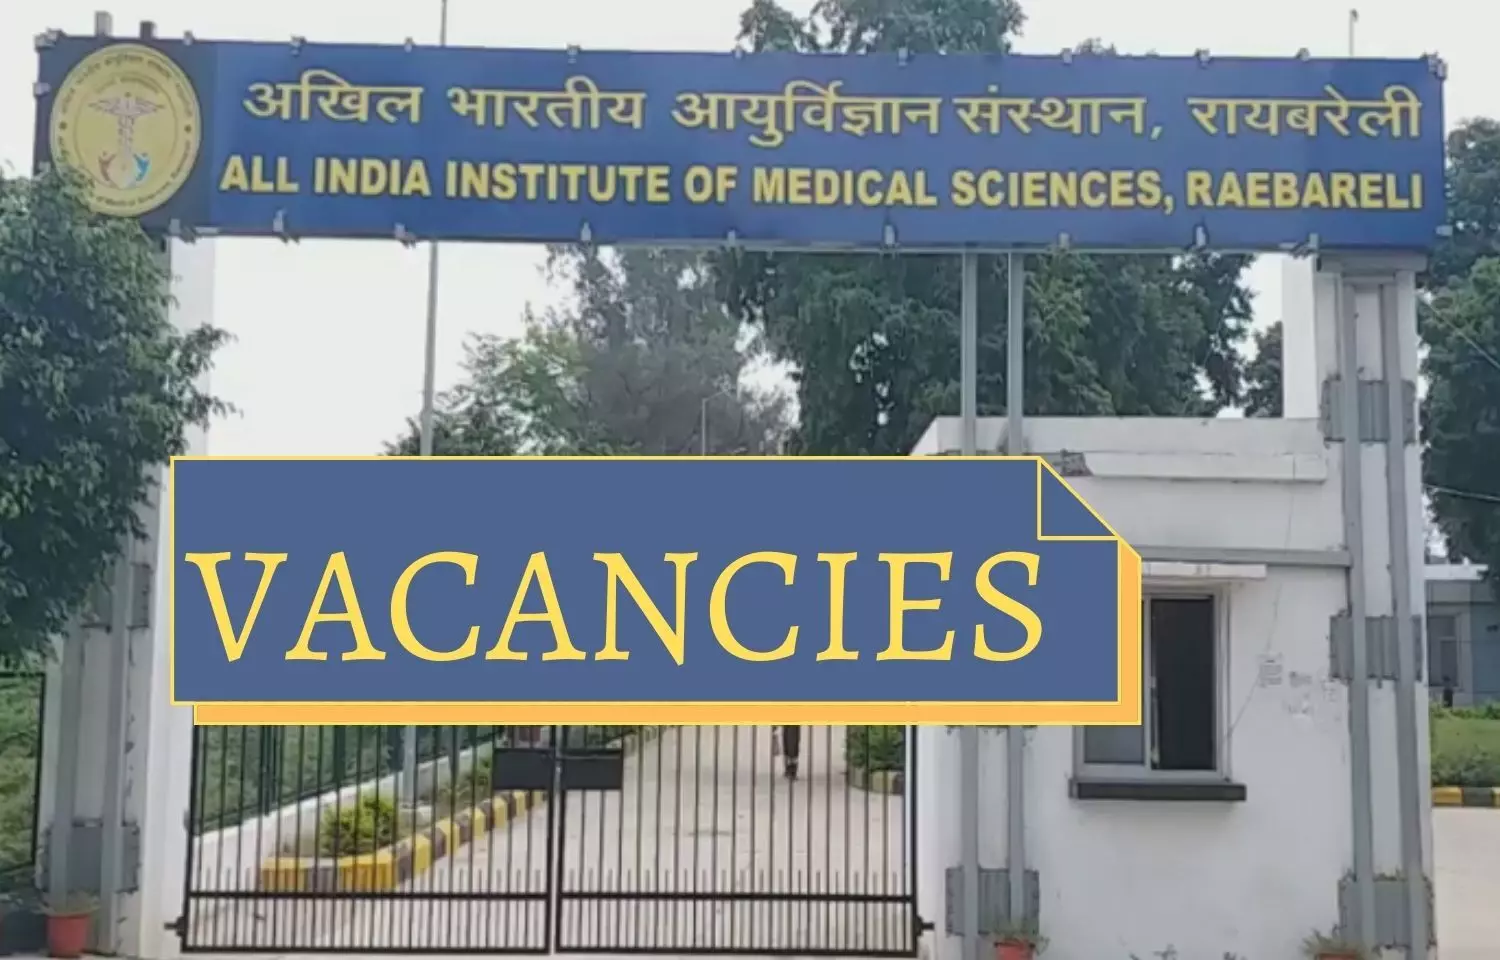 Walk In Interview At AIIMS Raebareli: Vacancies For Junior, Senior Resident Post, Check out Details